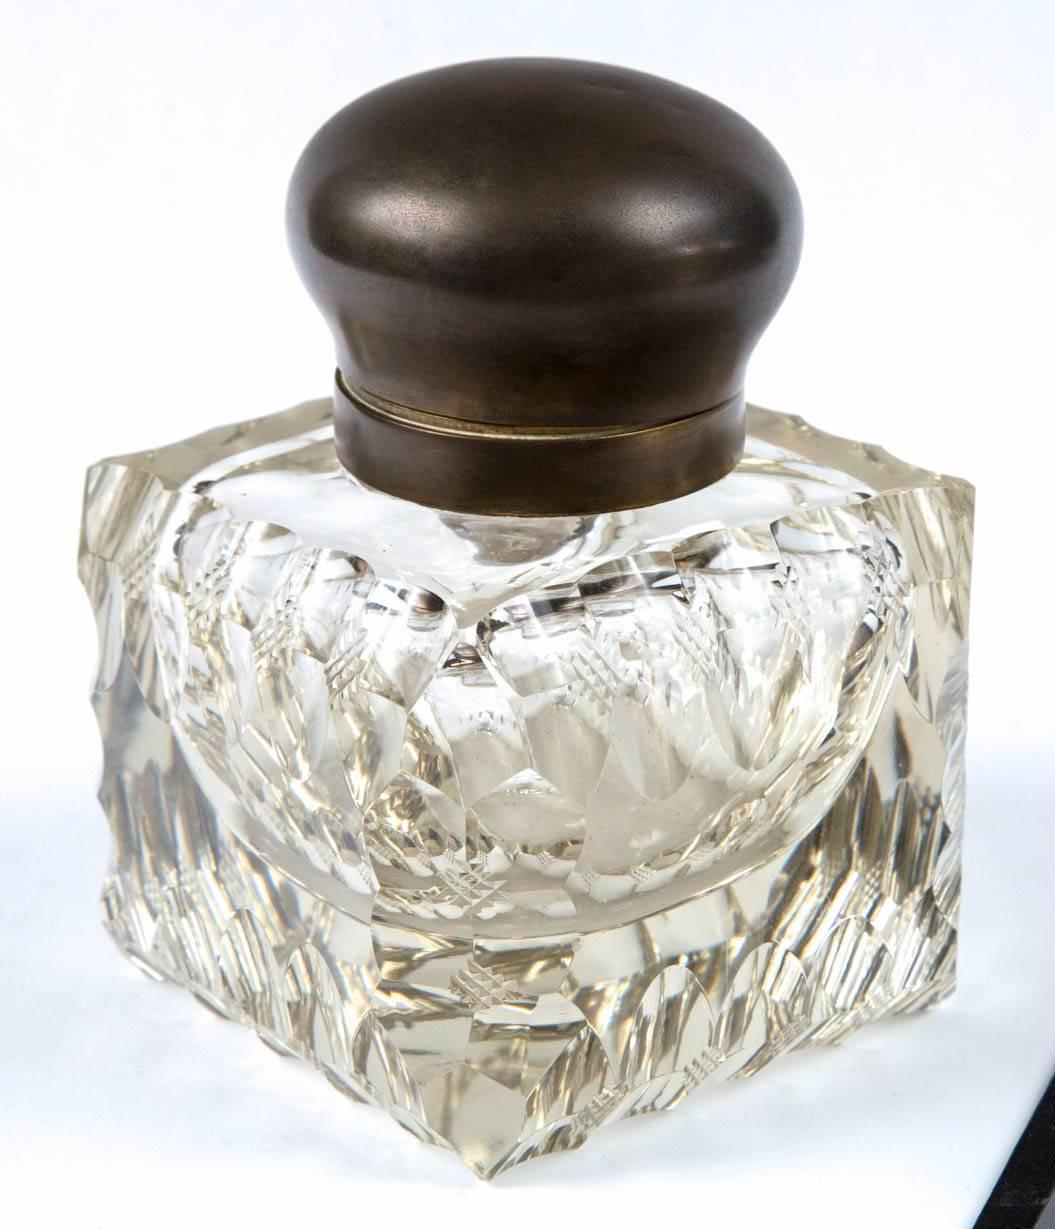 1890 large American cut crystal inkwell with metal top with gold wash inside, and all original glass insert.
The crystal inkwell has brilliant cuts throughout with diamond embossed cuts four on every side of square.
Wear consistent with age of